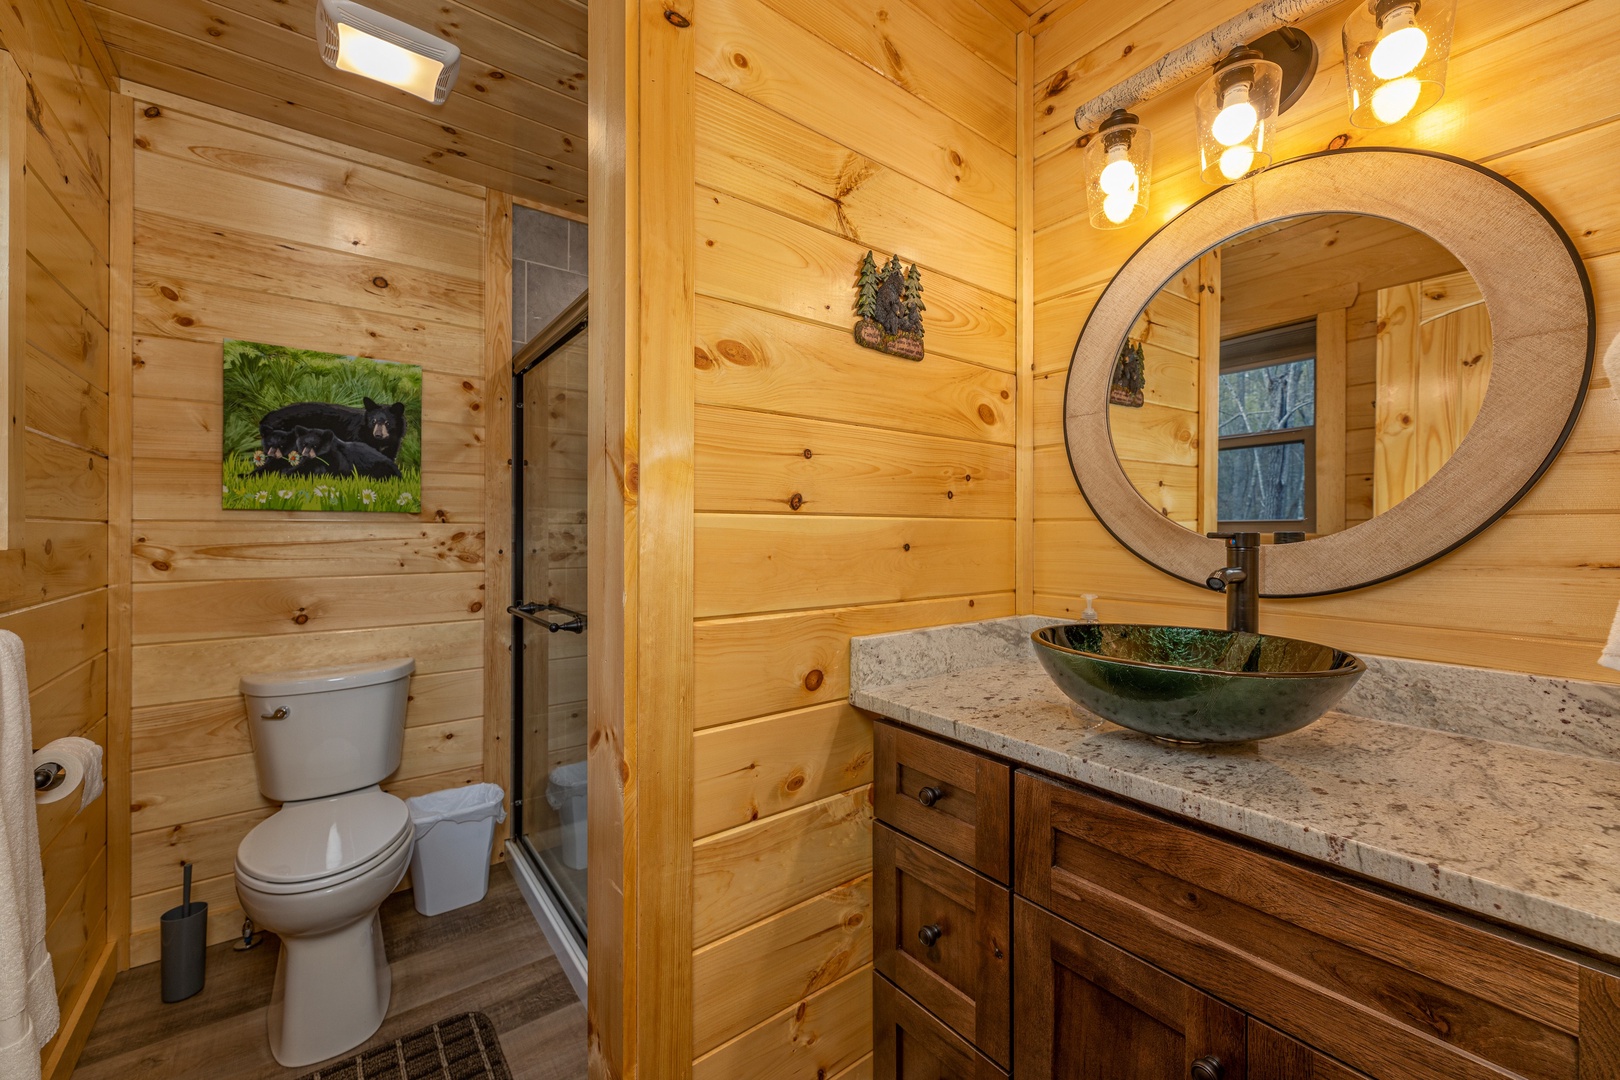 Bathroom with a shower at Poolin Around, a 2 bedroom cabin rental located in Gatlinburg